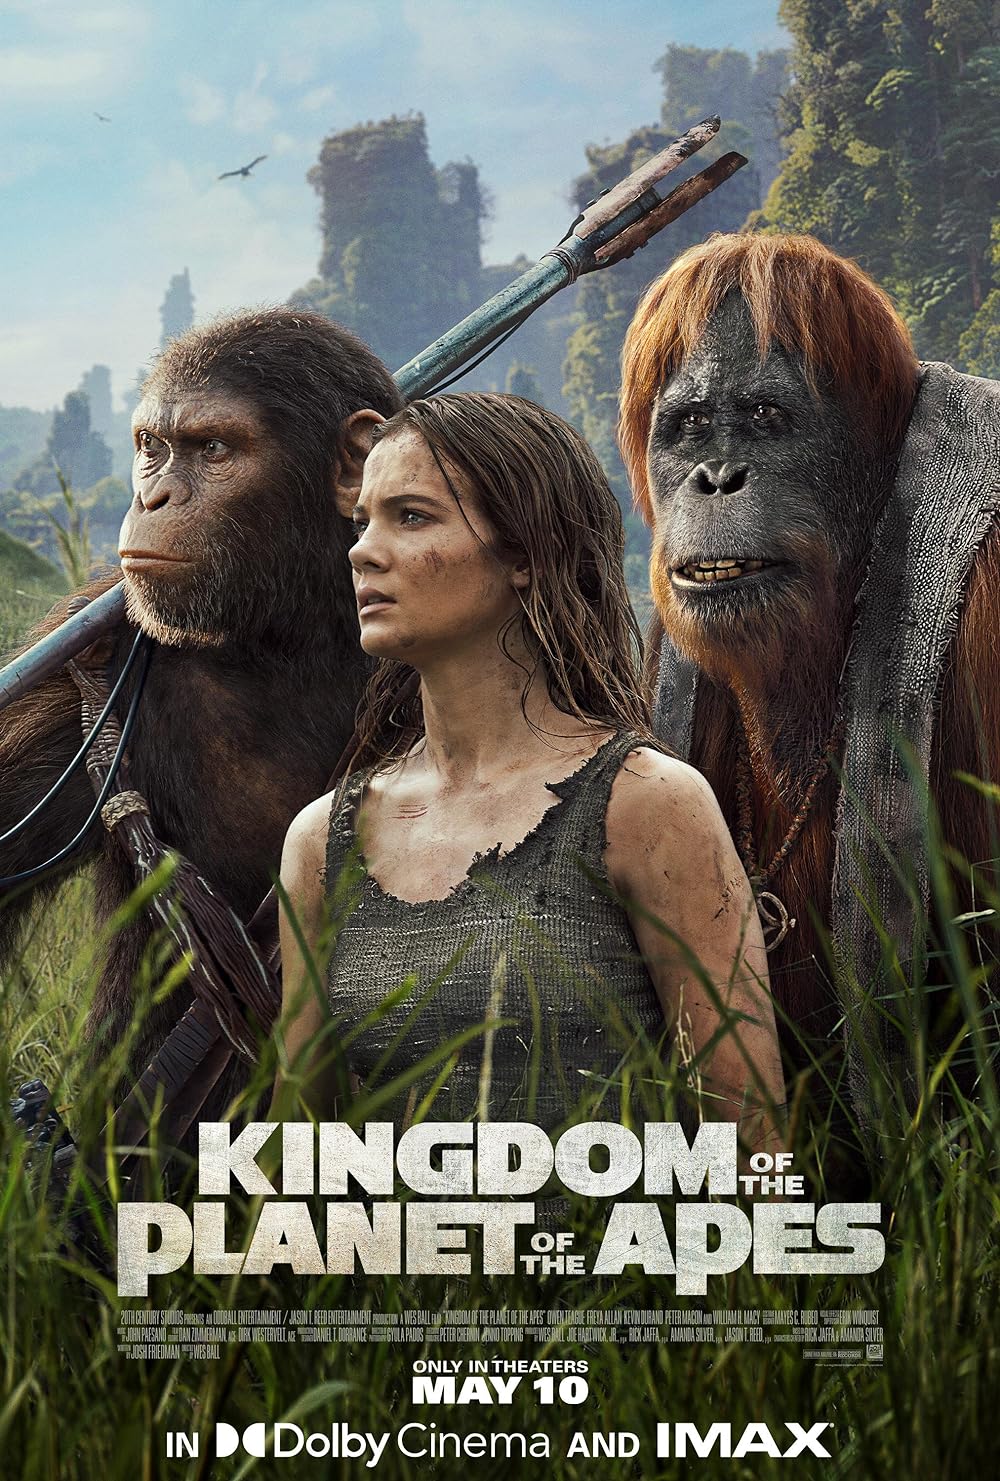 Kingdom of the Planet of the Apes – Premiere